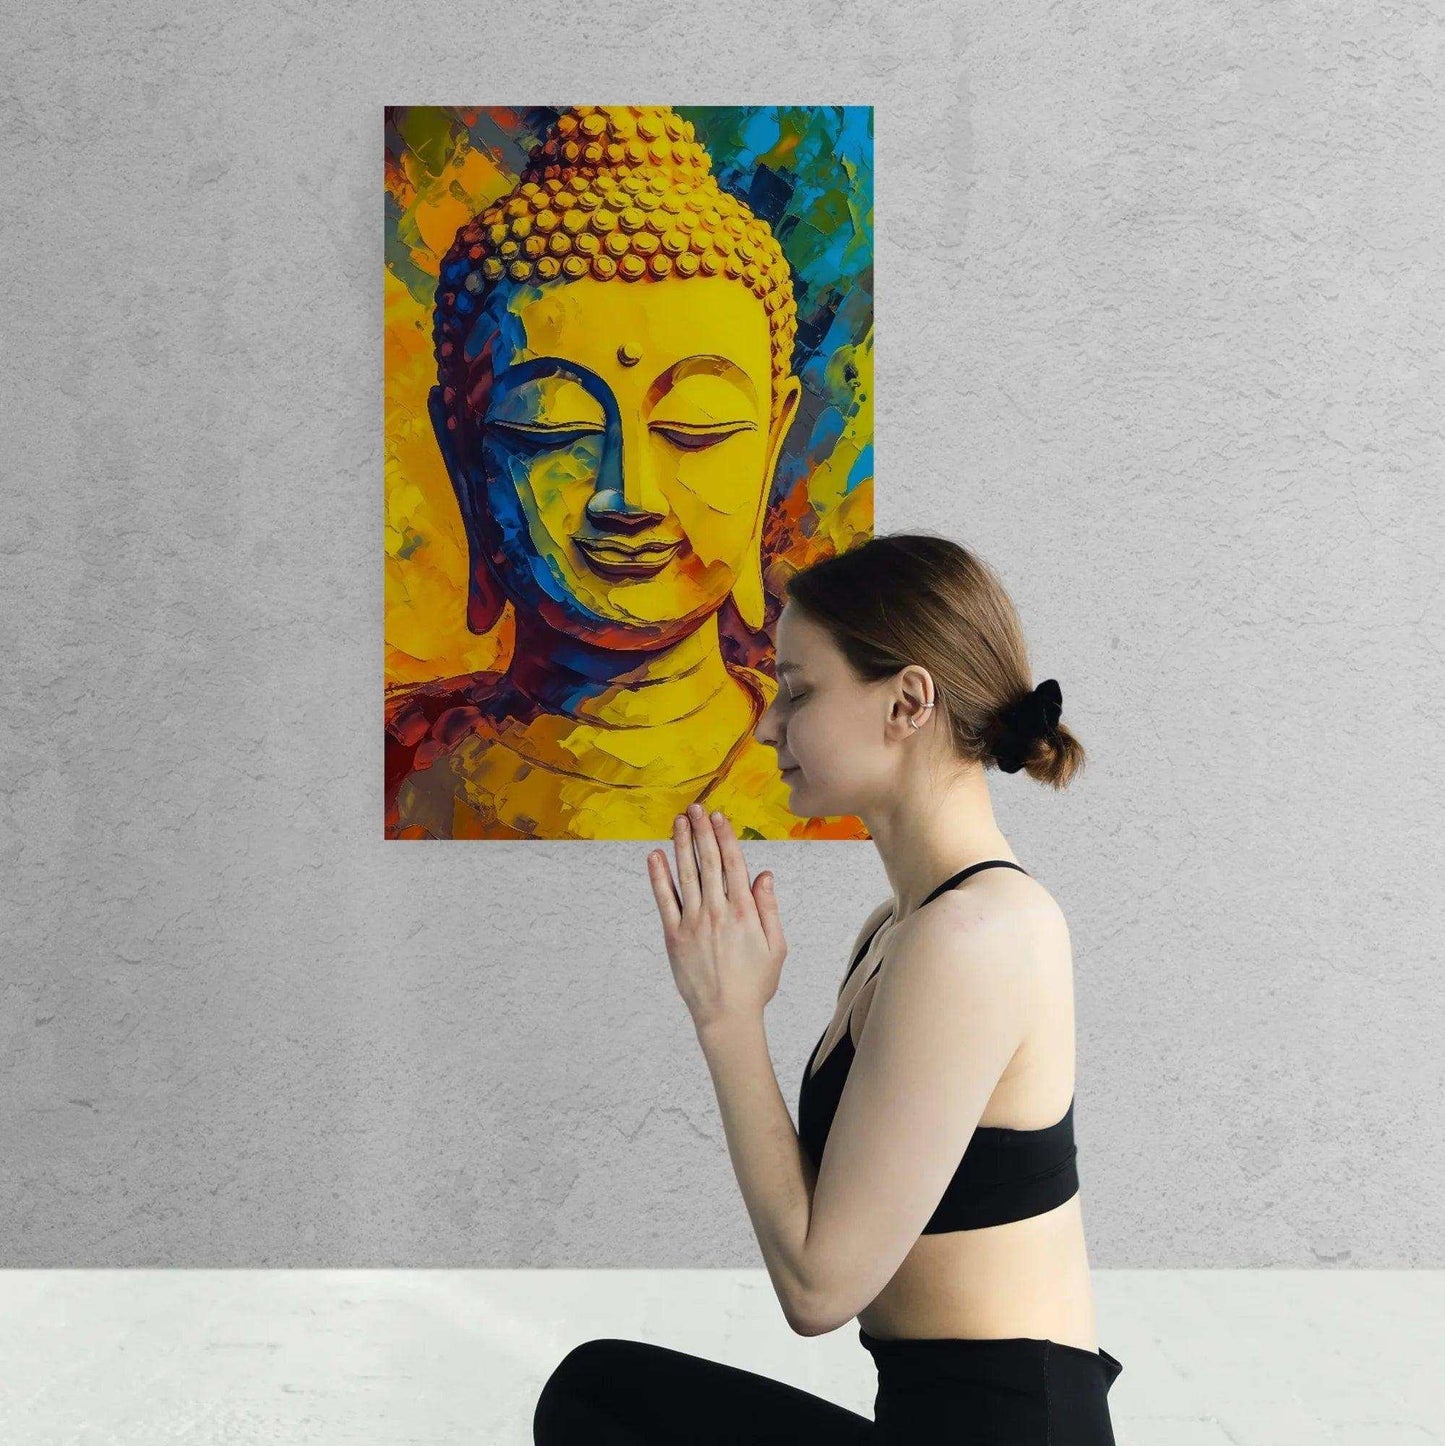 A woman in a black top performs Namaste in front of a vibrant, abstract Buddha painting with a mosaic of warm yellow, orange, and blue hues on a textured white wall.